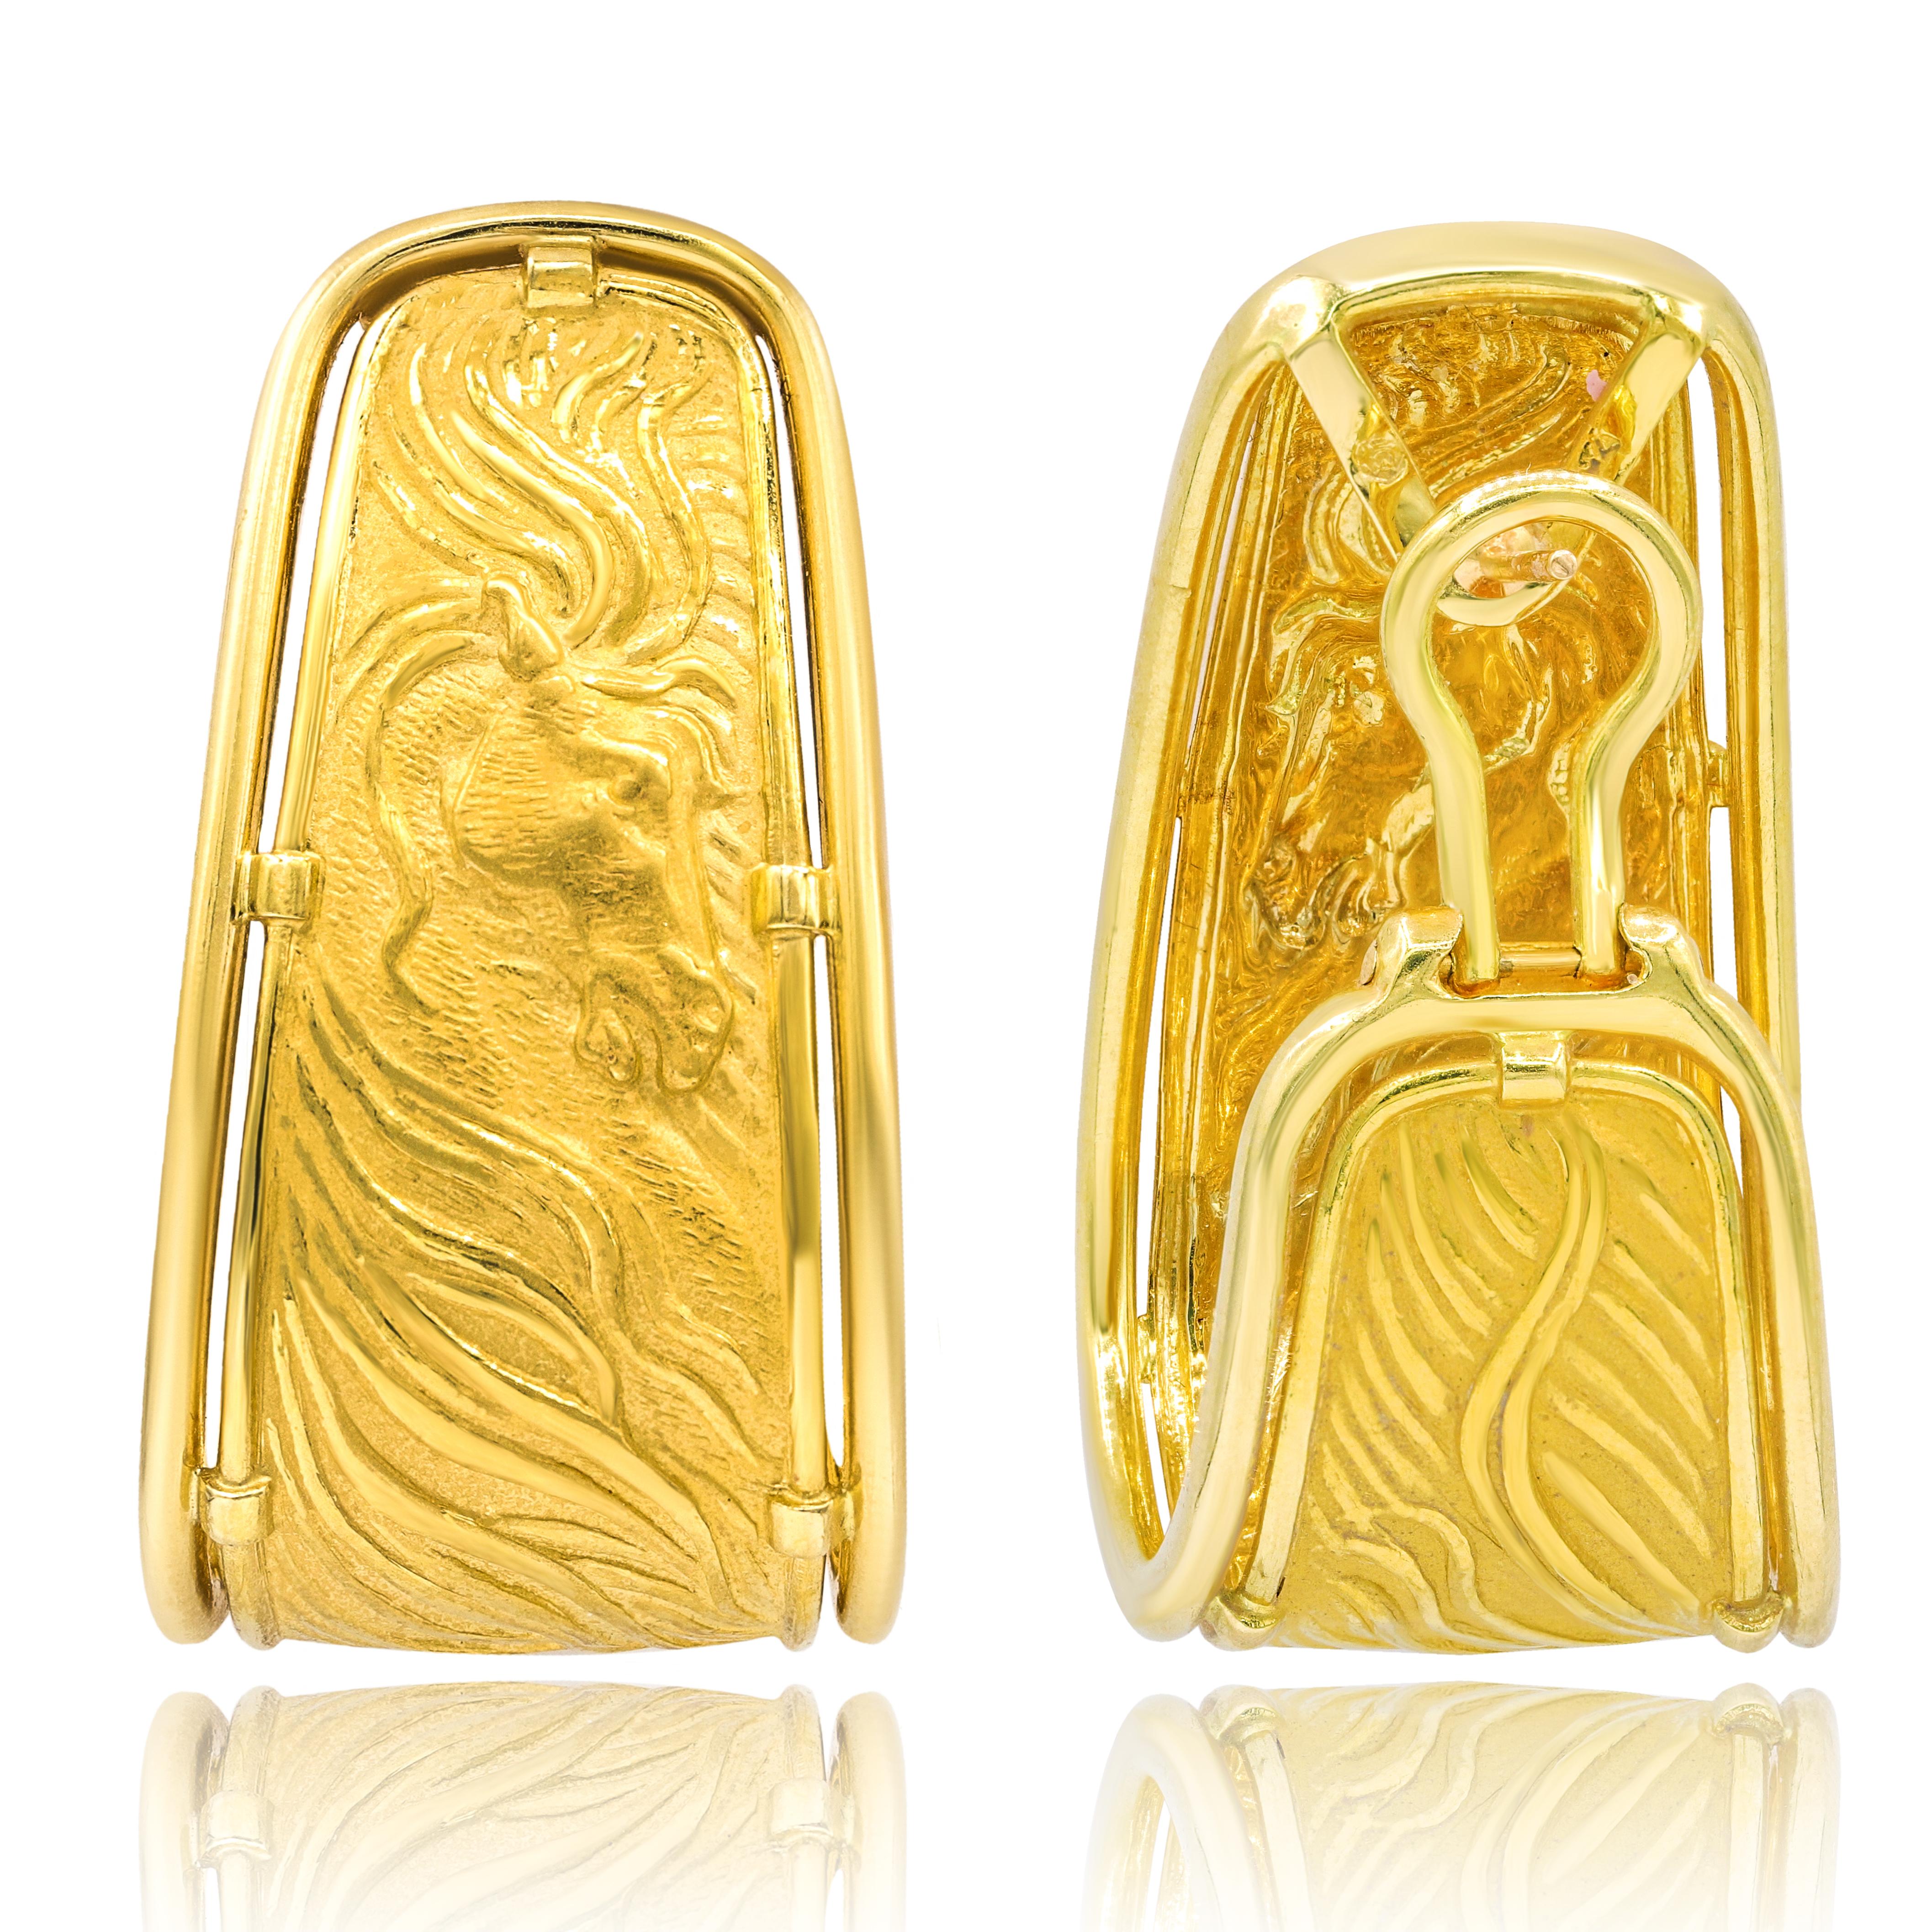 Carrera y Carrera Equus Earrings  made in 18K yellow gold Carrera y Carrera earrings, measures 1 1/2 inch long to 3/4 of an inch wide 
Hallmarked CC